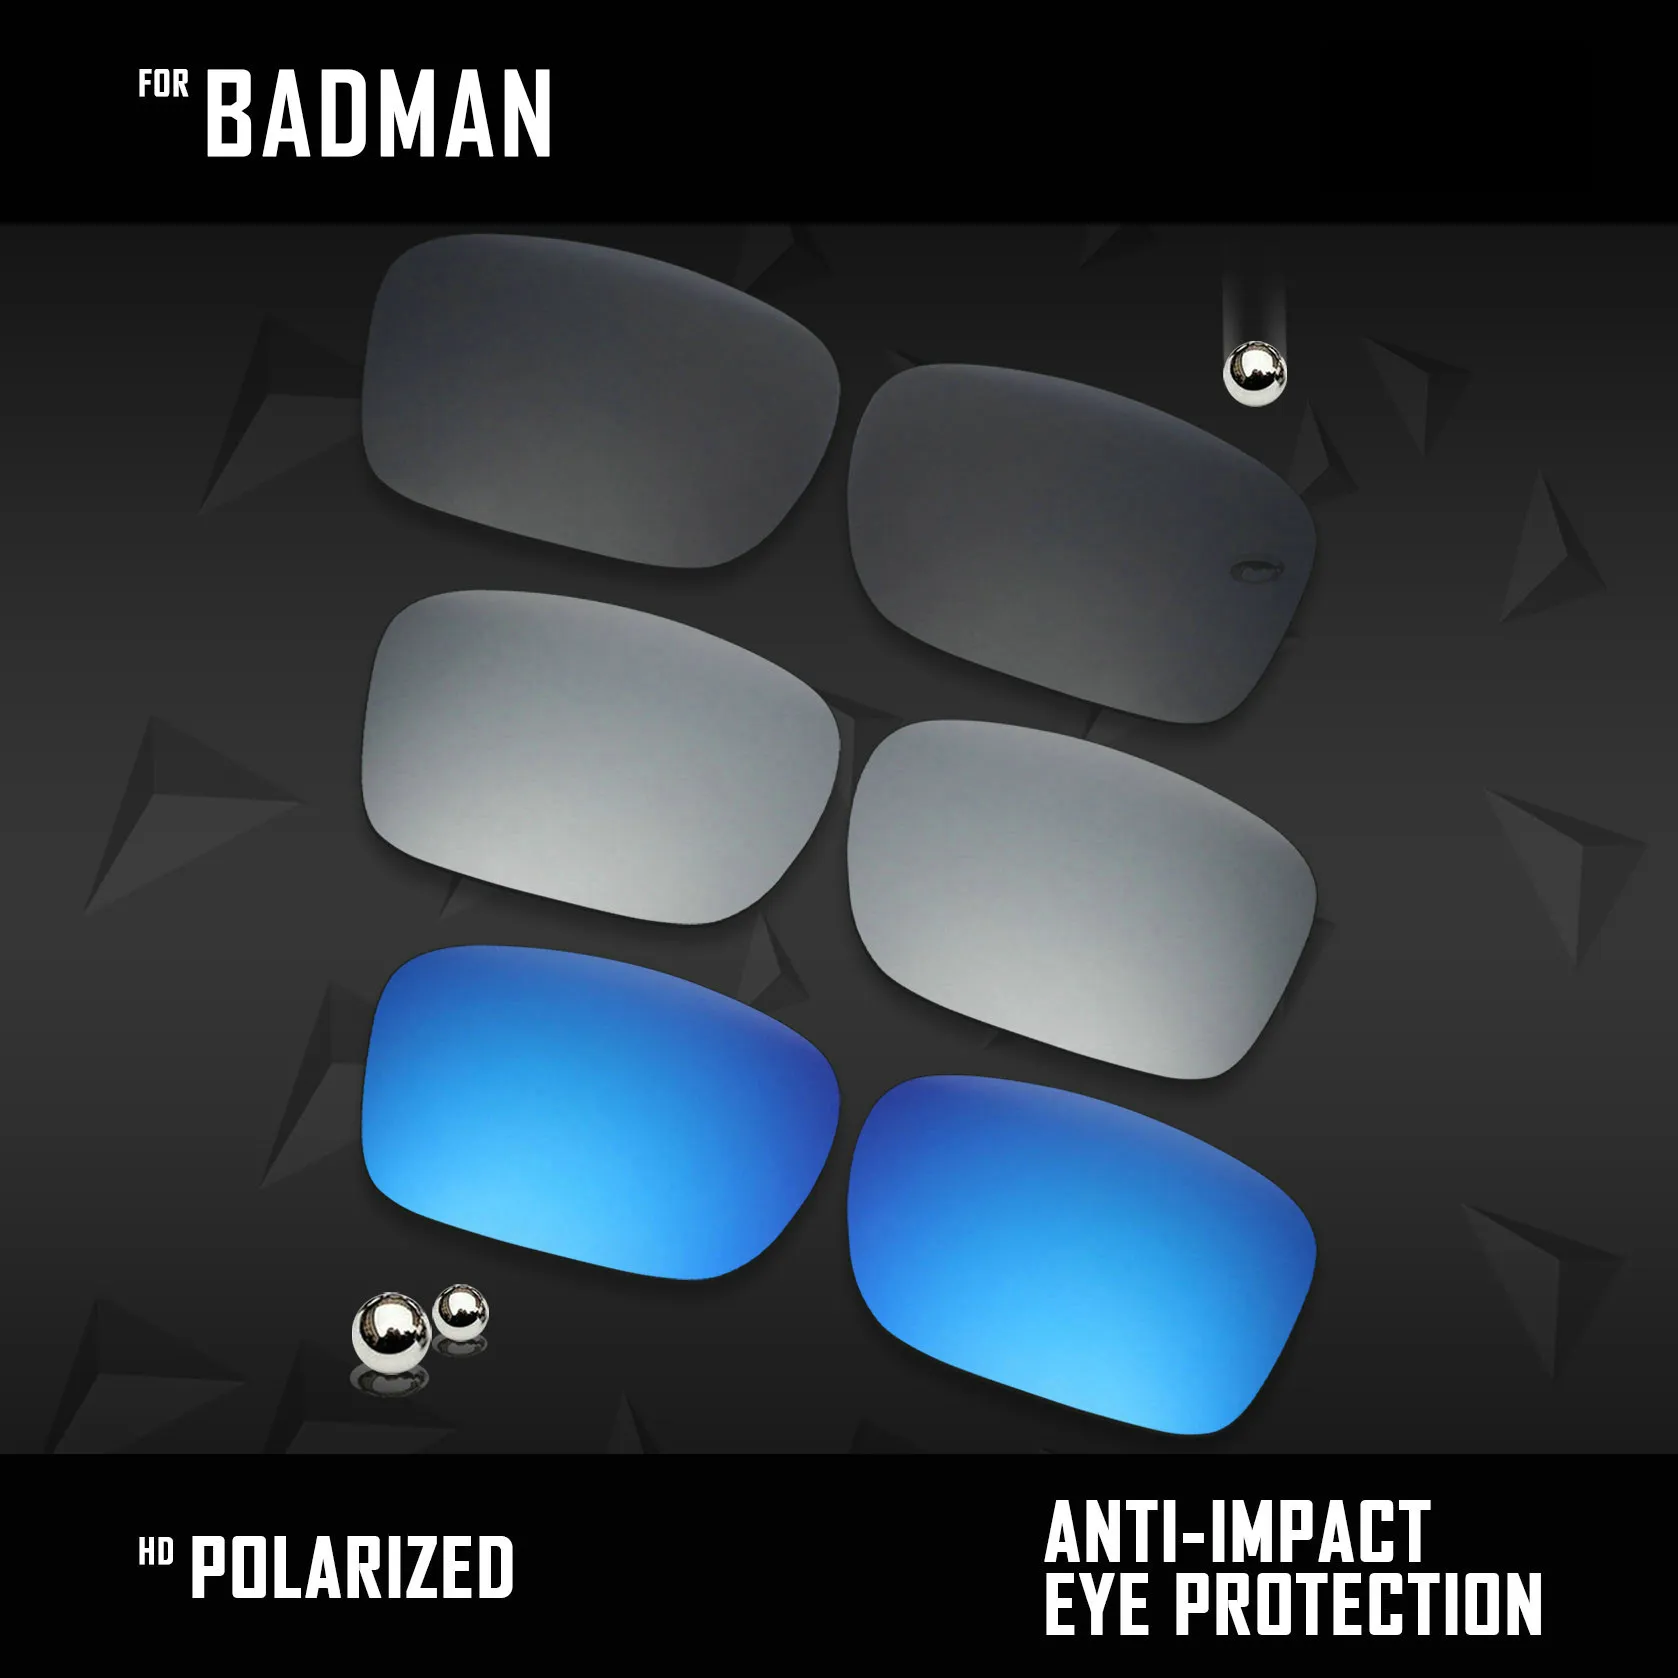 OOWLIT 3 Pairs Polarized Sunglasses Replacement Lenses for Oakley Badman OO6020-Black & Silver & Ice Blue